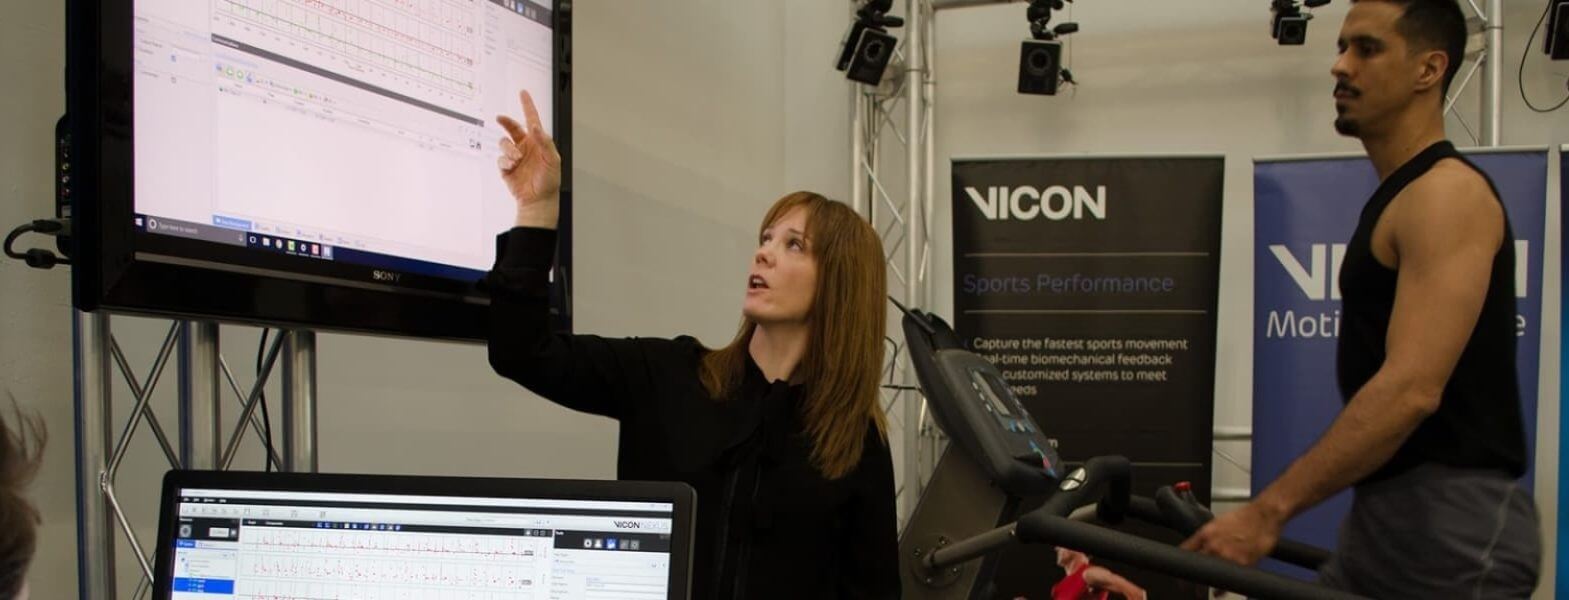 Vicon Integrates Inertial Tracking into the Optical World